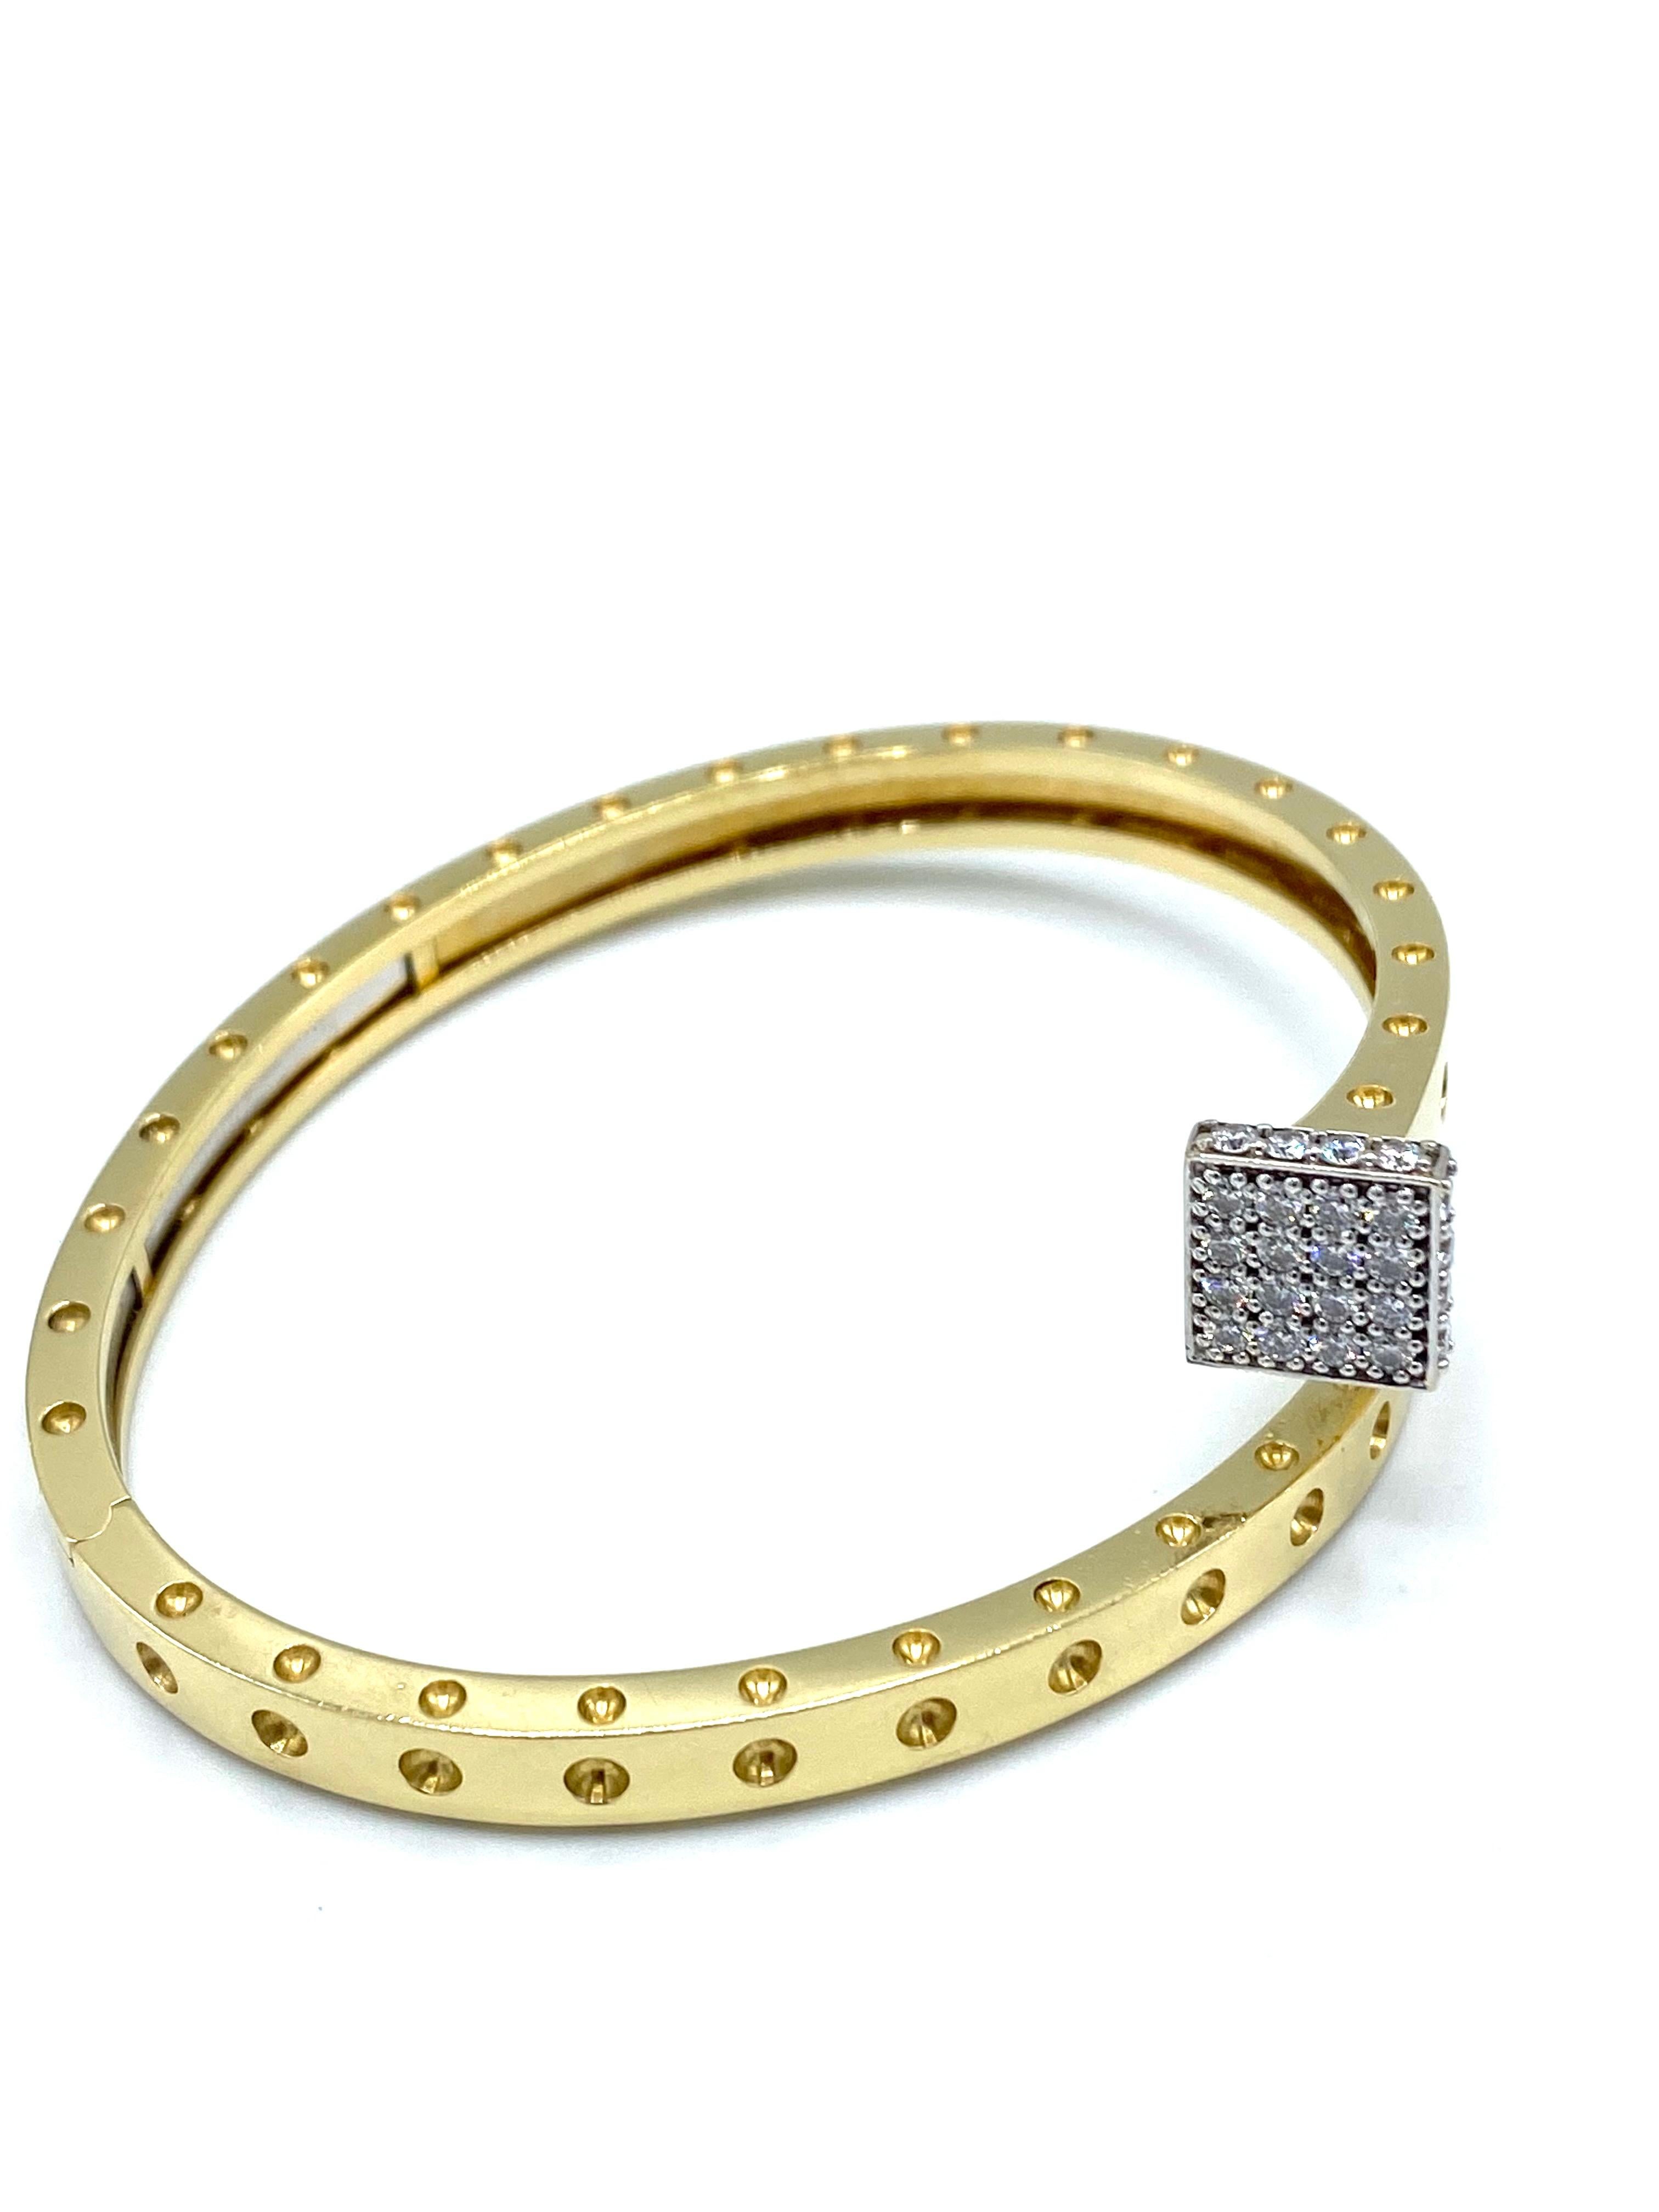 Product details:

The bracelet is designed by Italian designer Roberto Coin. It is made out of 18 karat yellow gold and it features 0.45 cts of round brilliant cut diamonds detail.
Total weight is 25.9 grams.
The inner circumference is 7 inches. 